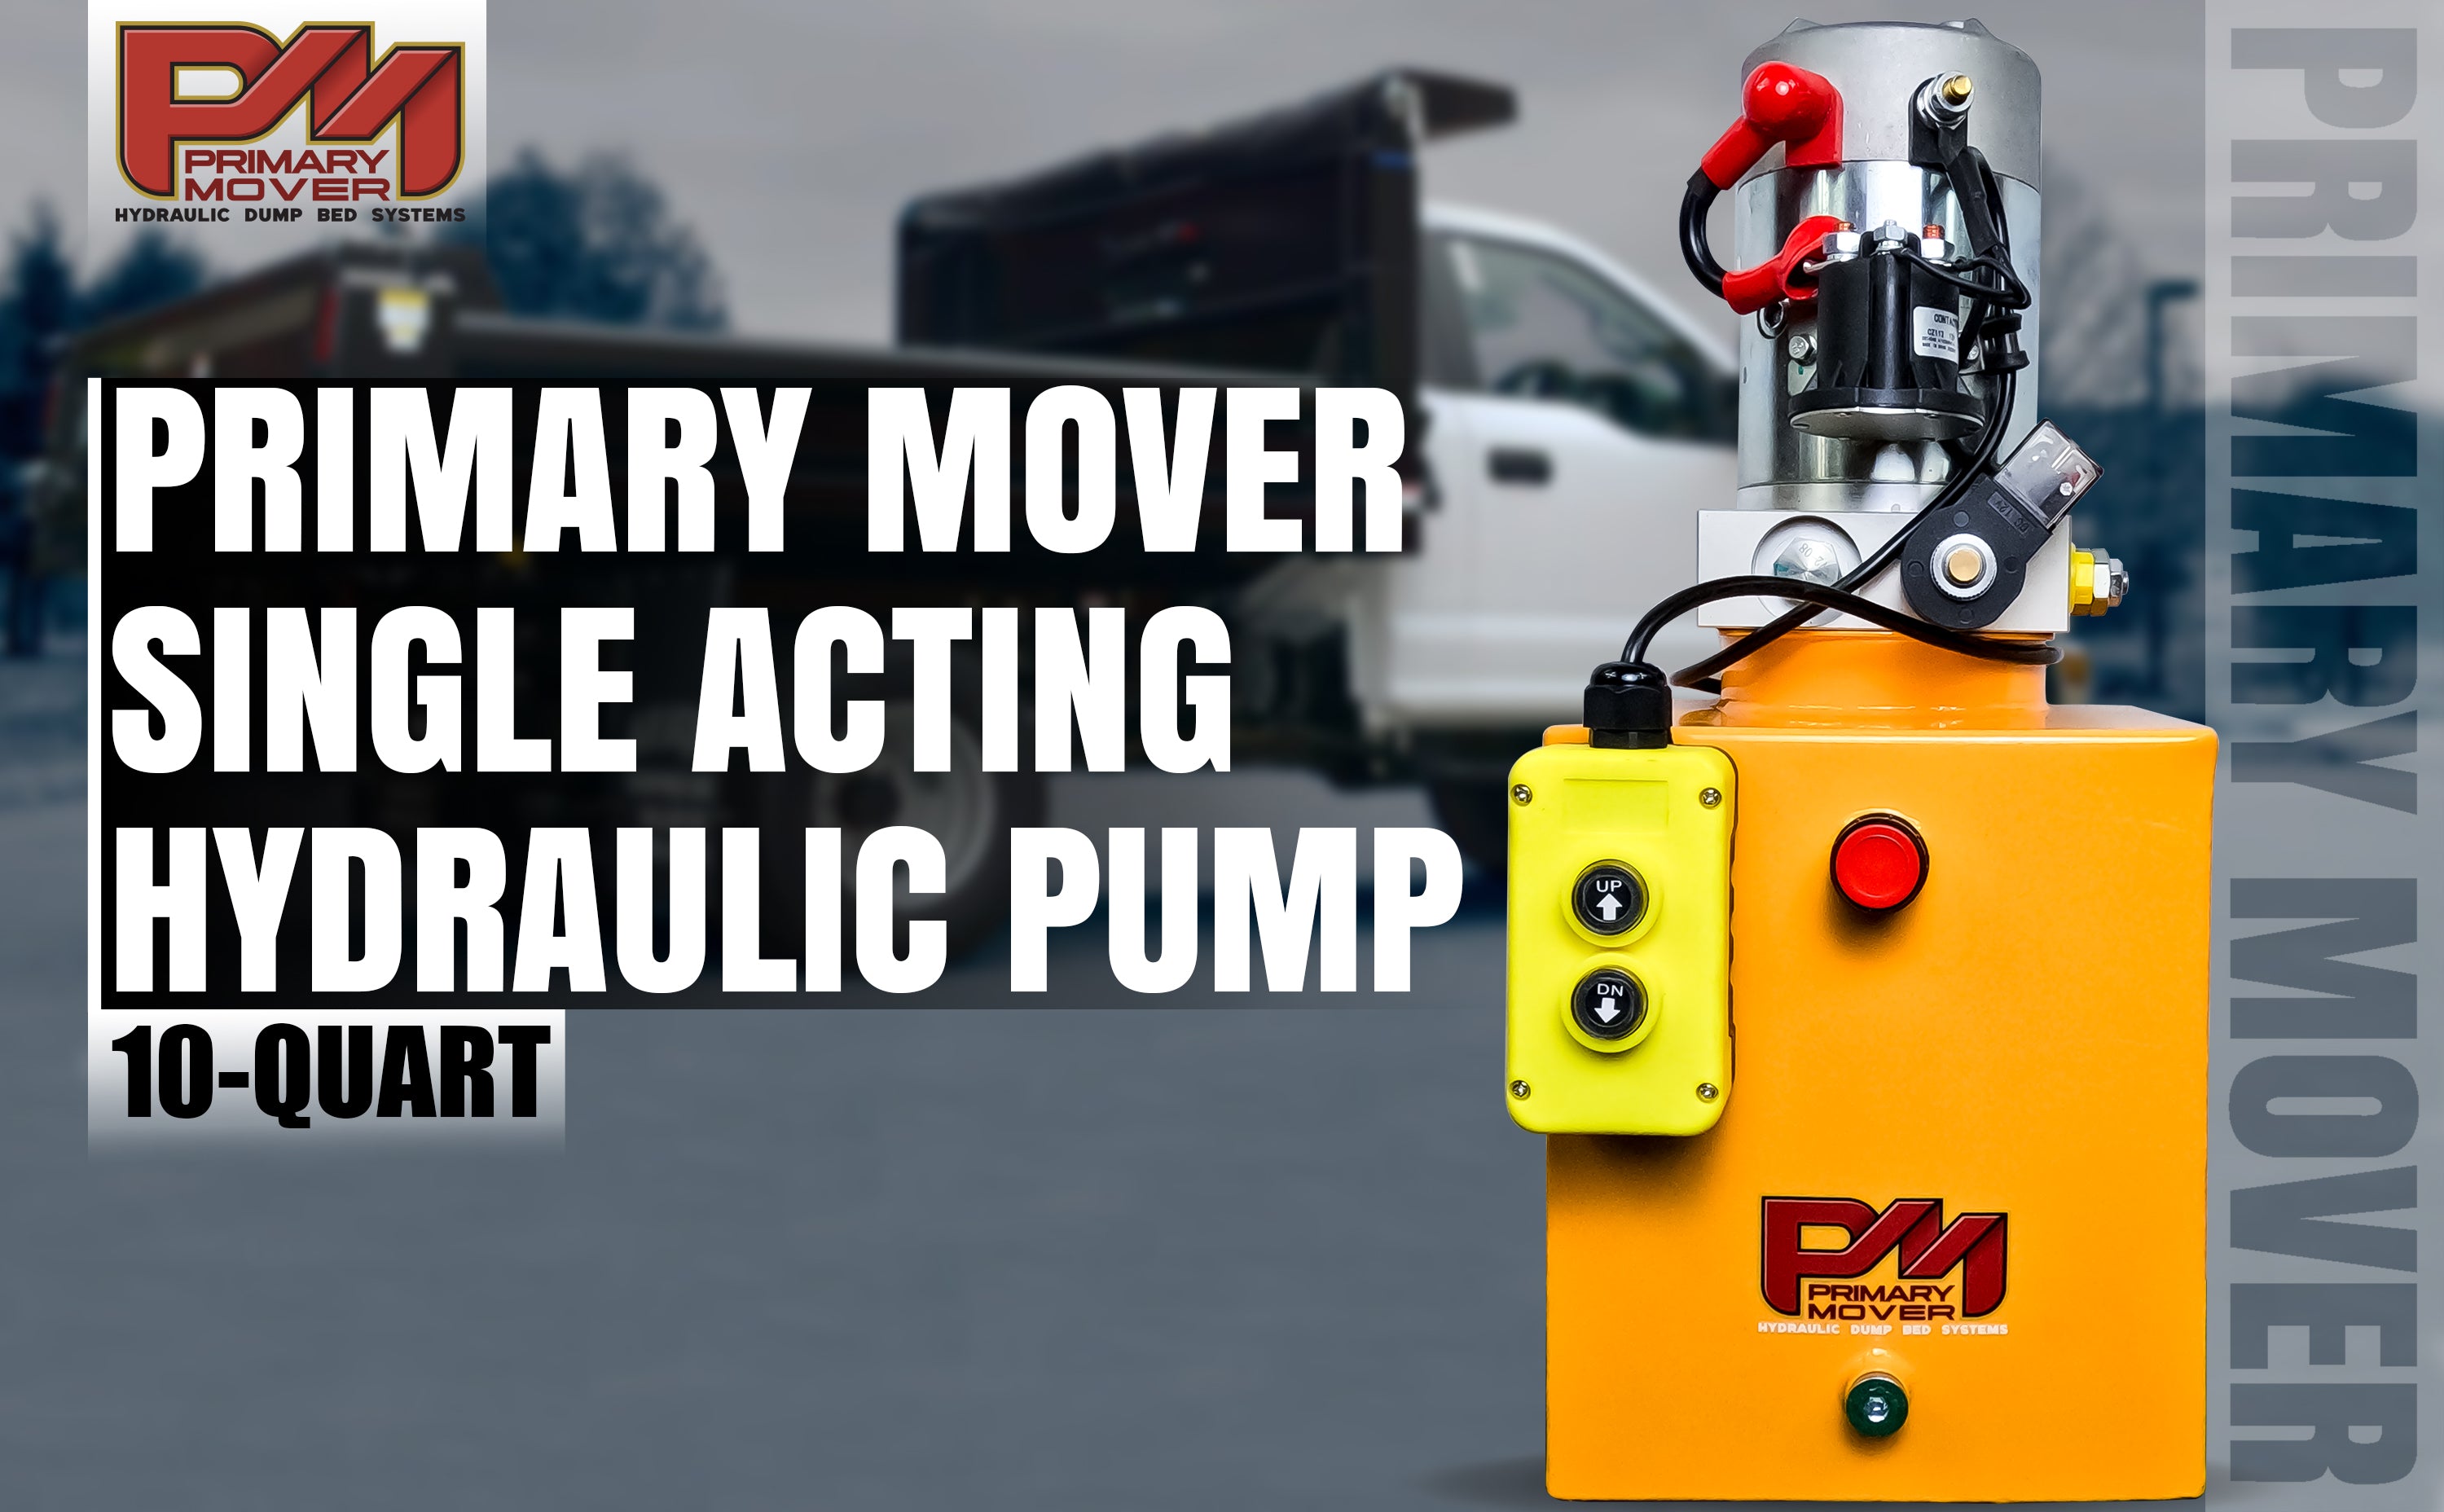 Primary Mover 12V Single-Acting Hydraulic Pump - Steel Reservoir, compact and efficient for hydraulic dump bed systems, featuring single-acting pump and 4-quart translucent reservoir.